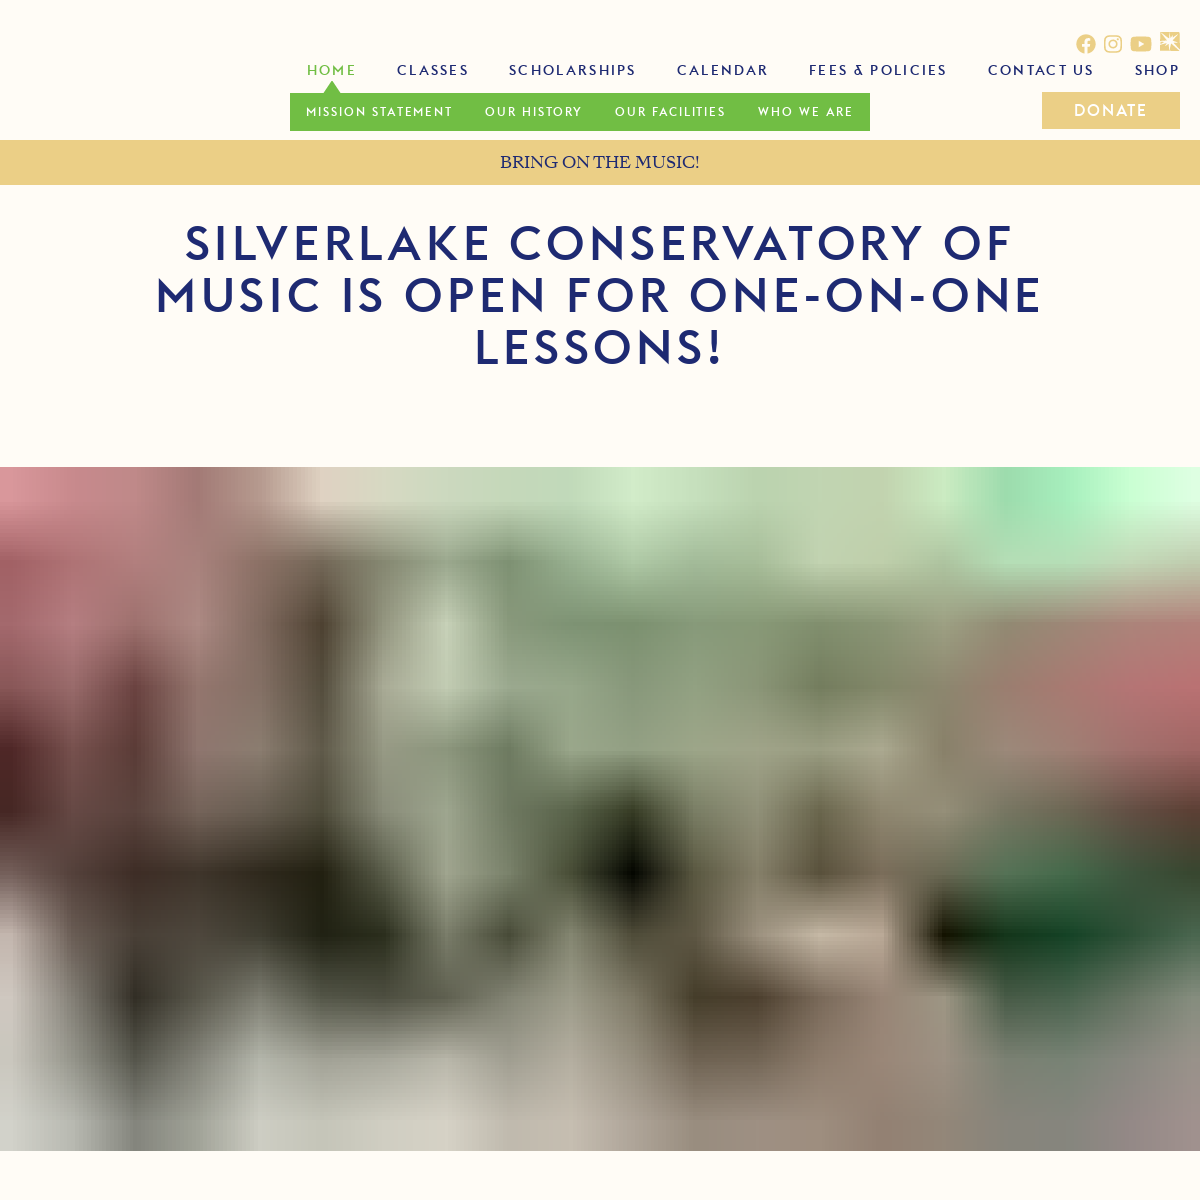 A complete backup of silverlakeconservatory.org